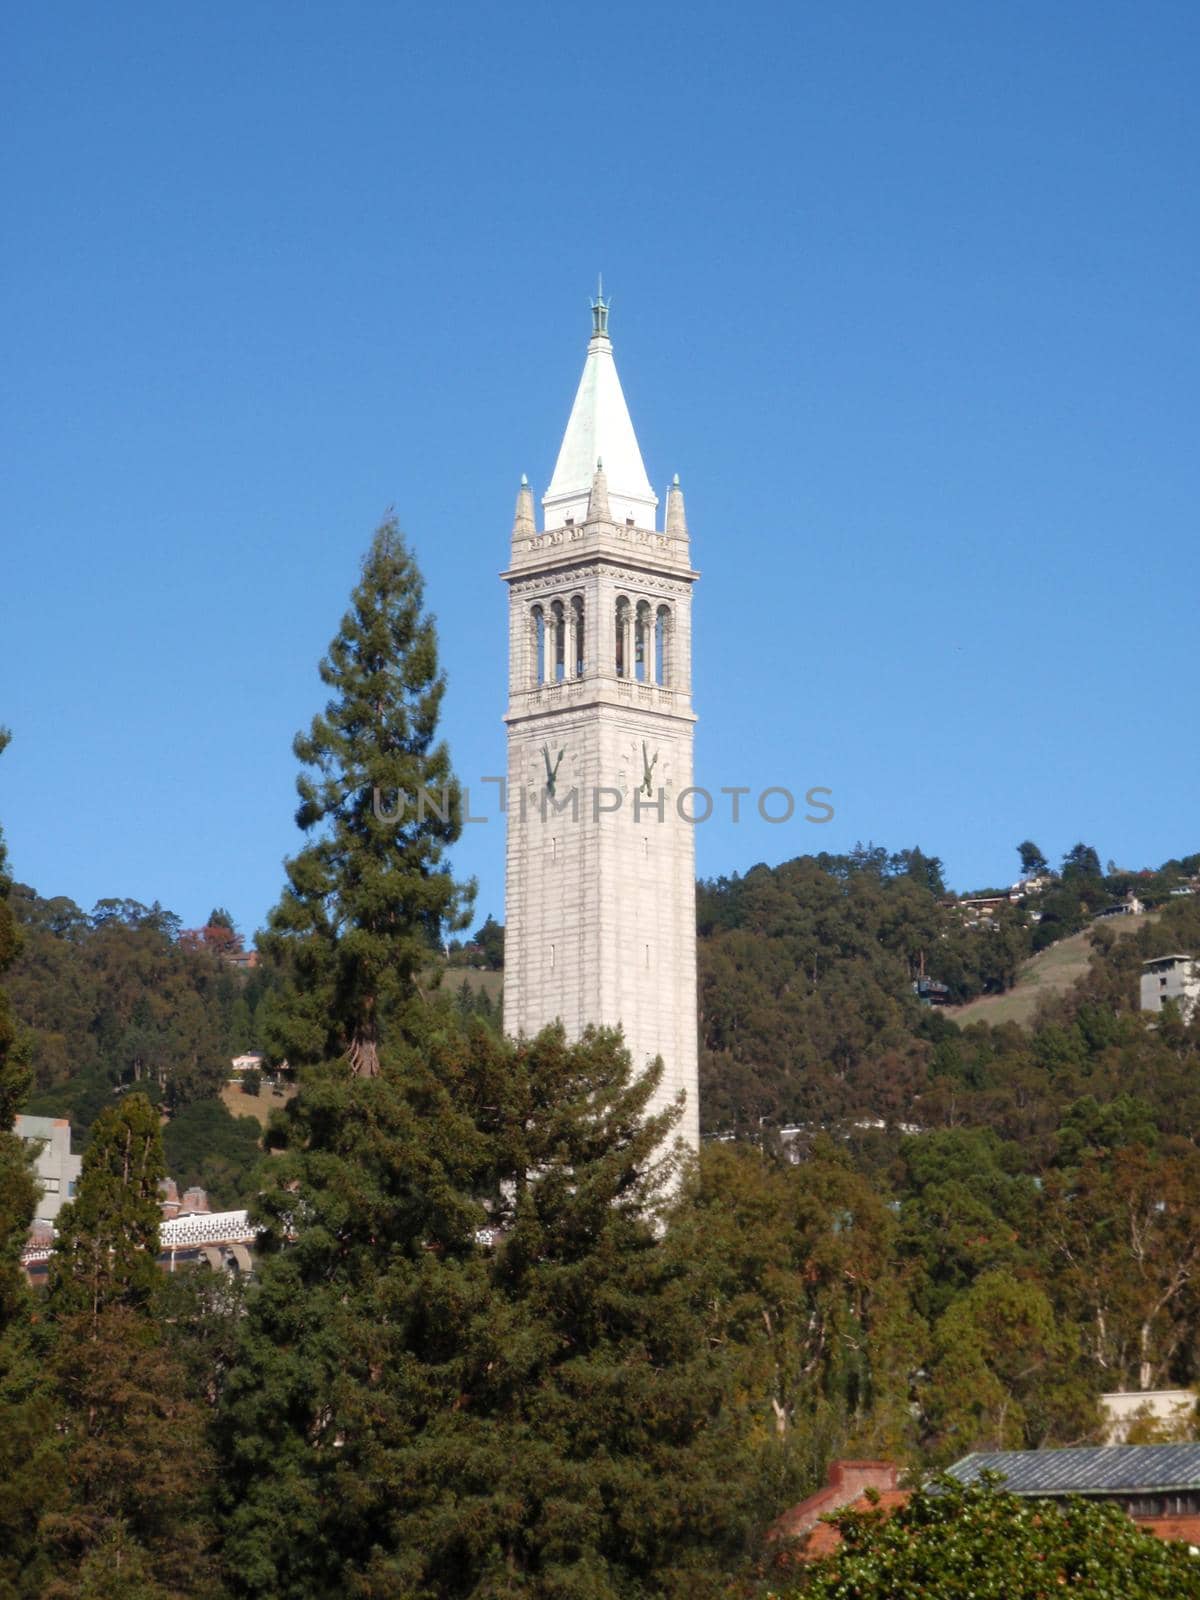 The Campanile also know as the Sather Tower raises above the trees by EricGBVD